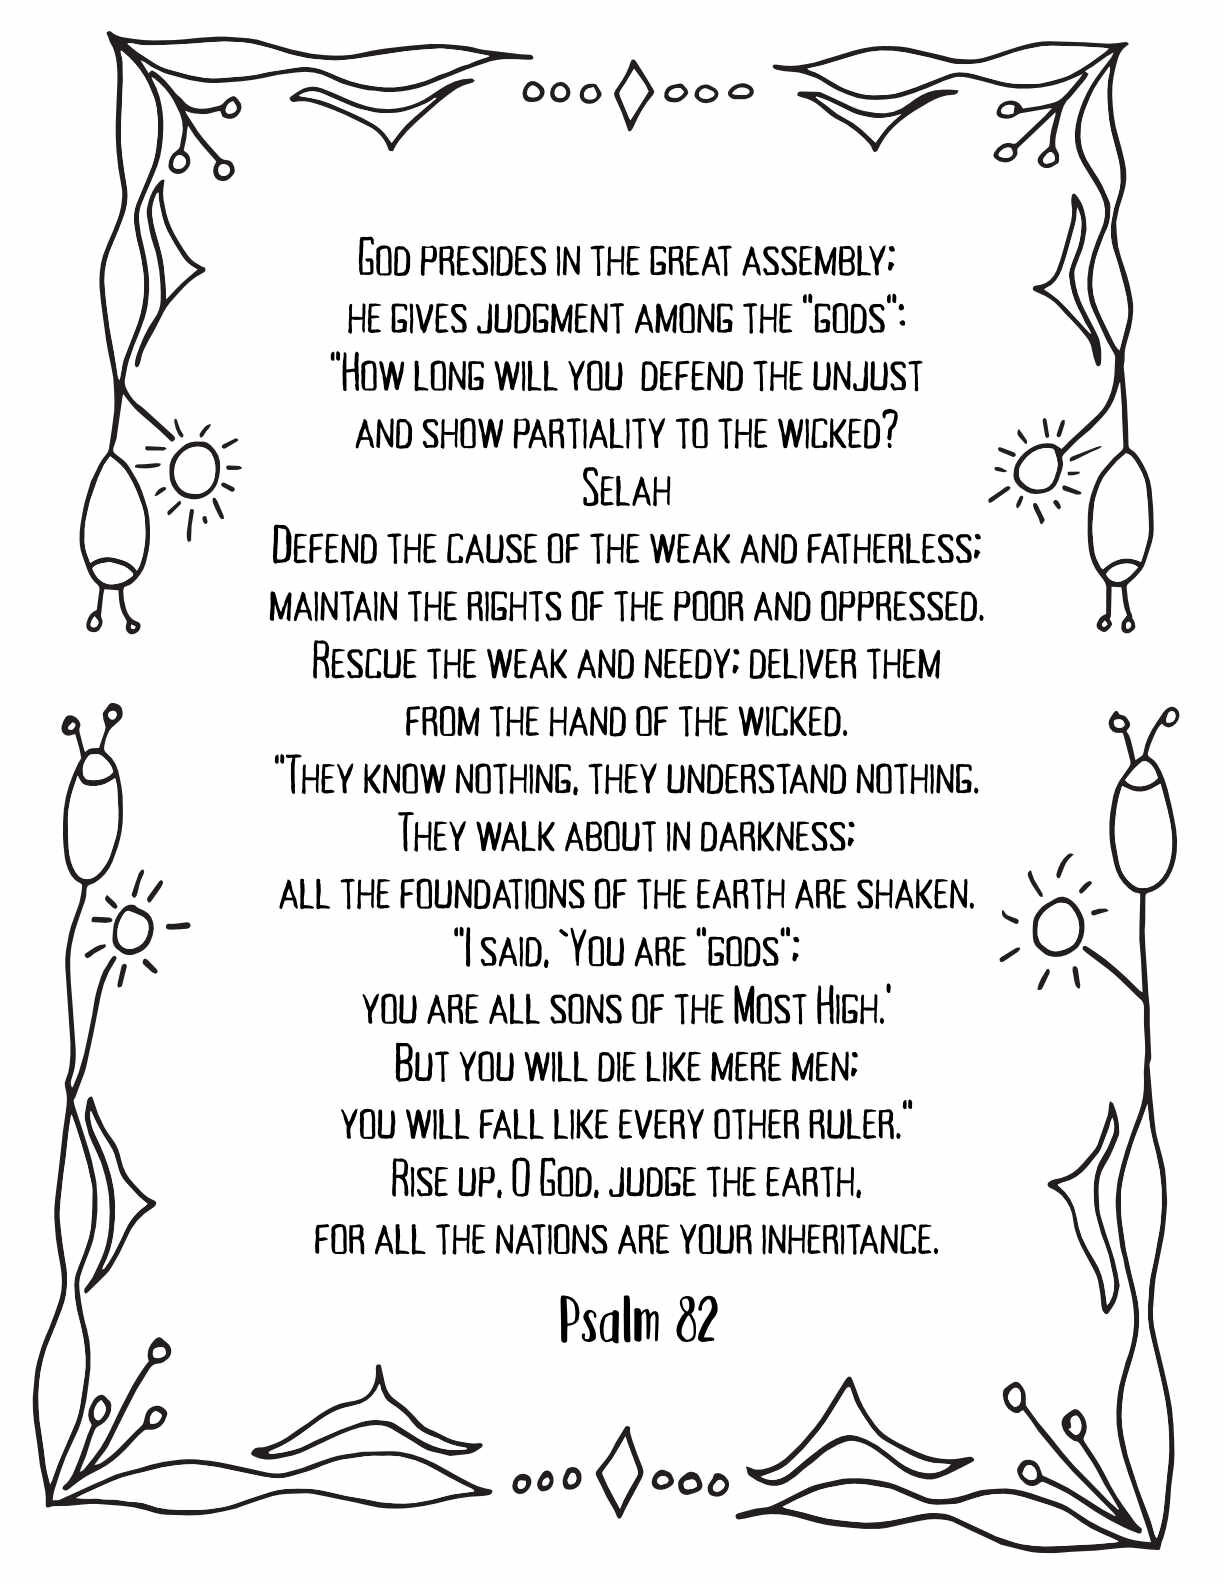 10 Free Printable Psalm Coloring Pages - Download and Color Adult Scripture - Psalm 82CLICK HERE TO DOWNLOAD THIS PAGE FREE